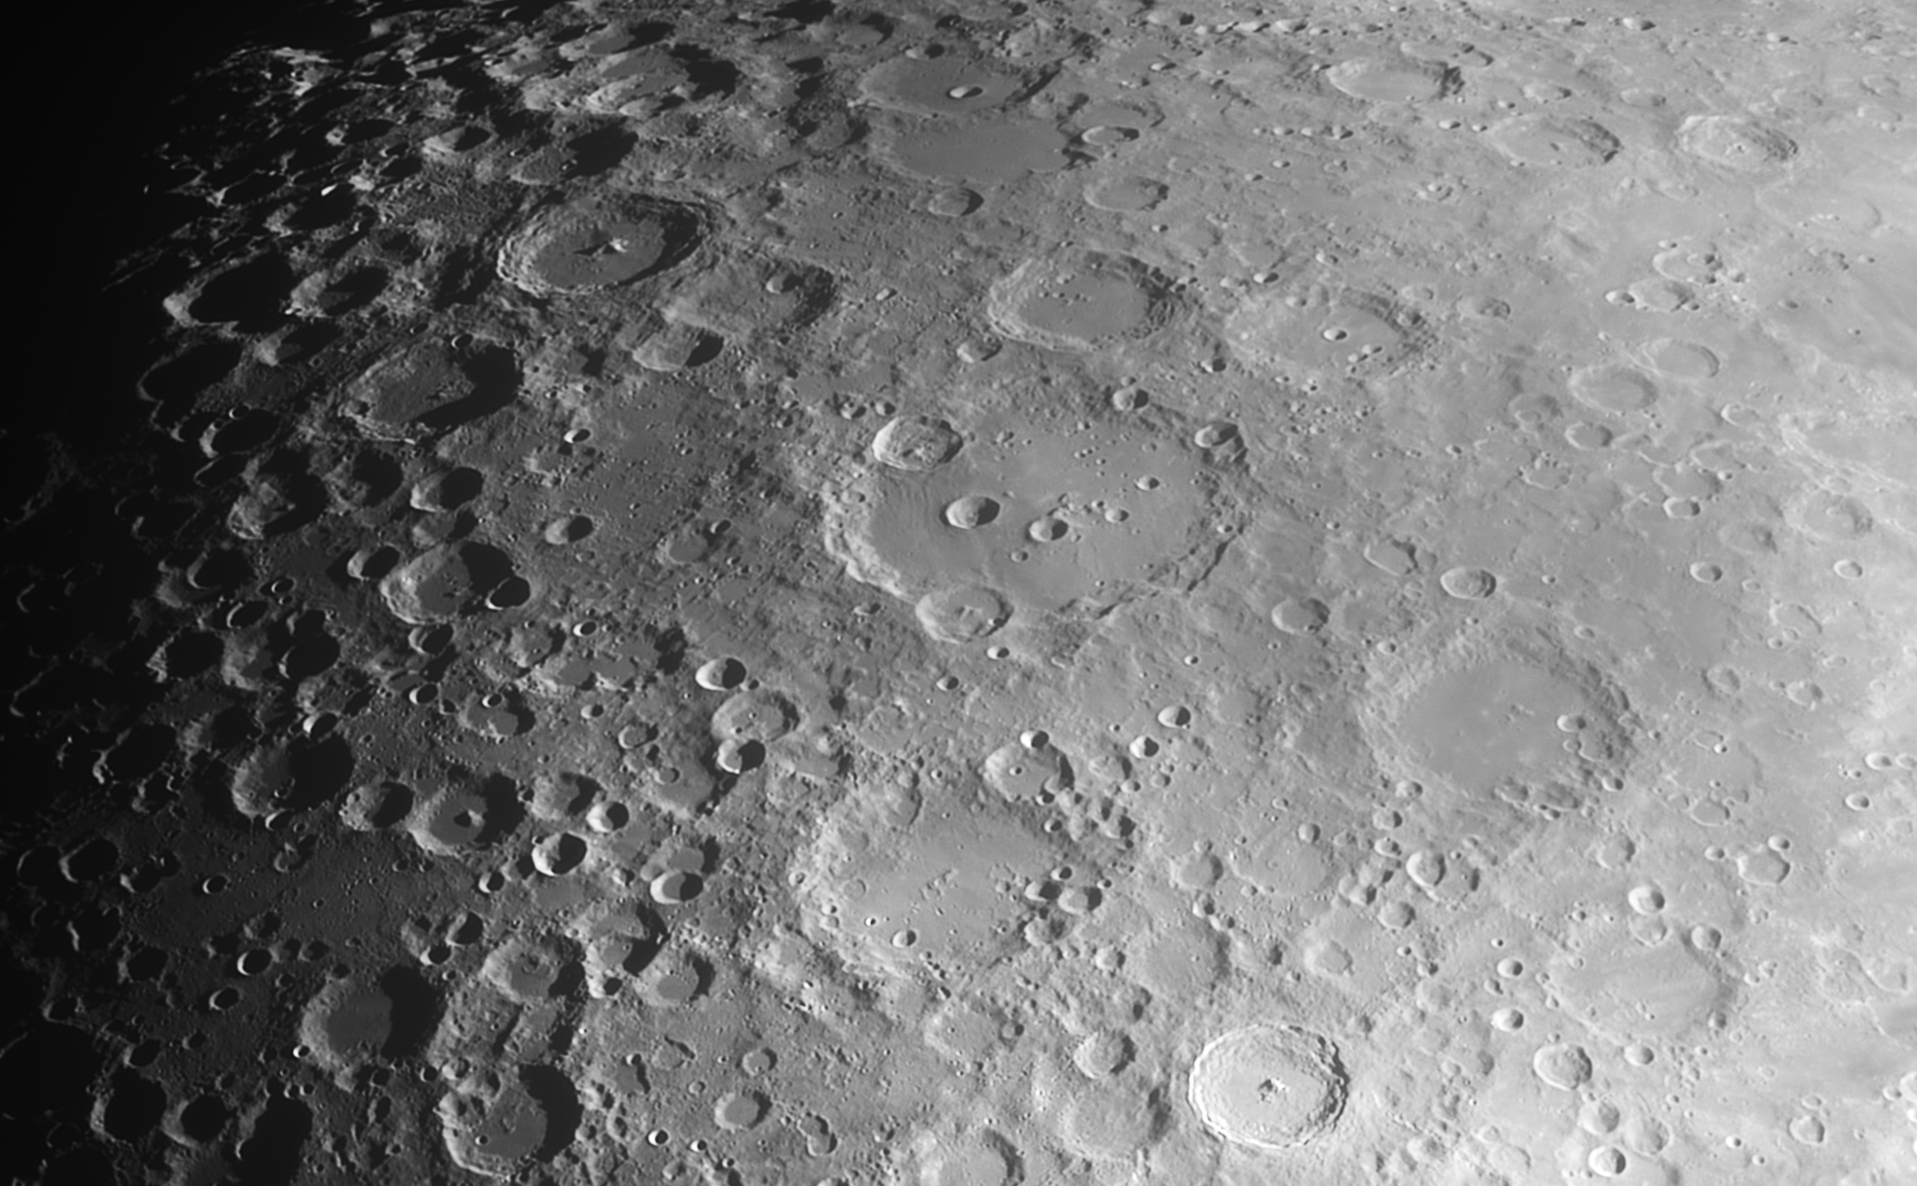 clavius_g21557__2020-01-16_T_05-02-24-0688_L_lapl2_ap10411.png.f80a12f46c3624f8b93c6af670a31e5f.png